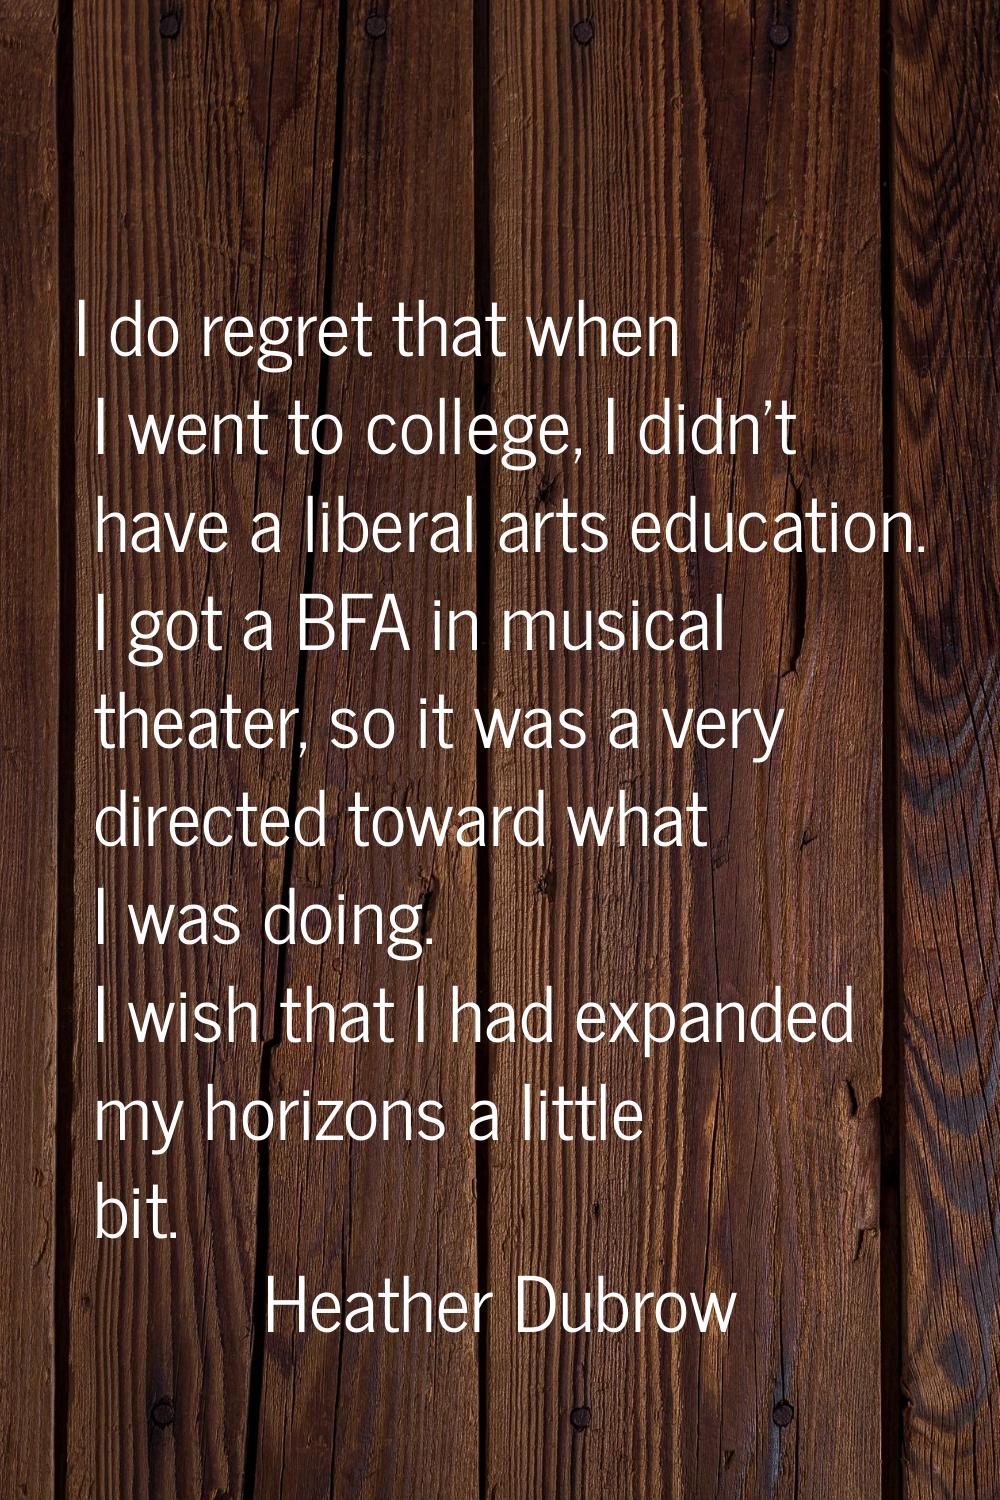 I do regret that when I went to college, I didn't have a liberal arts education. I got a BFA in mus